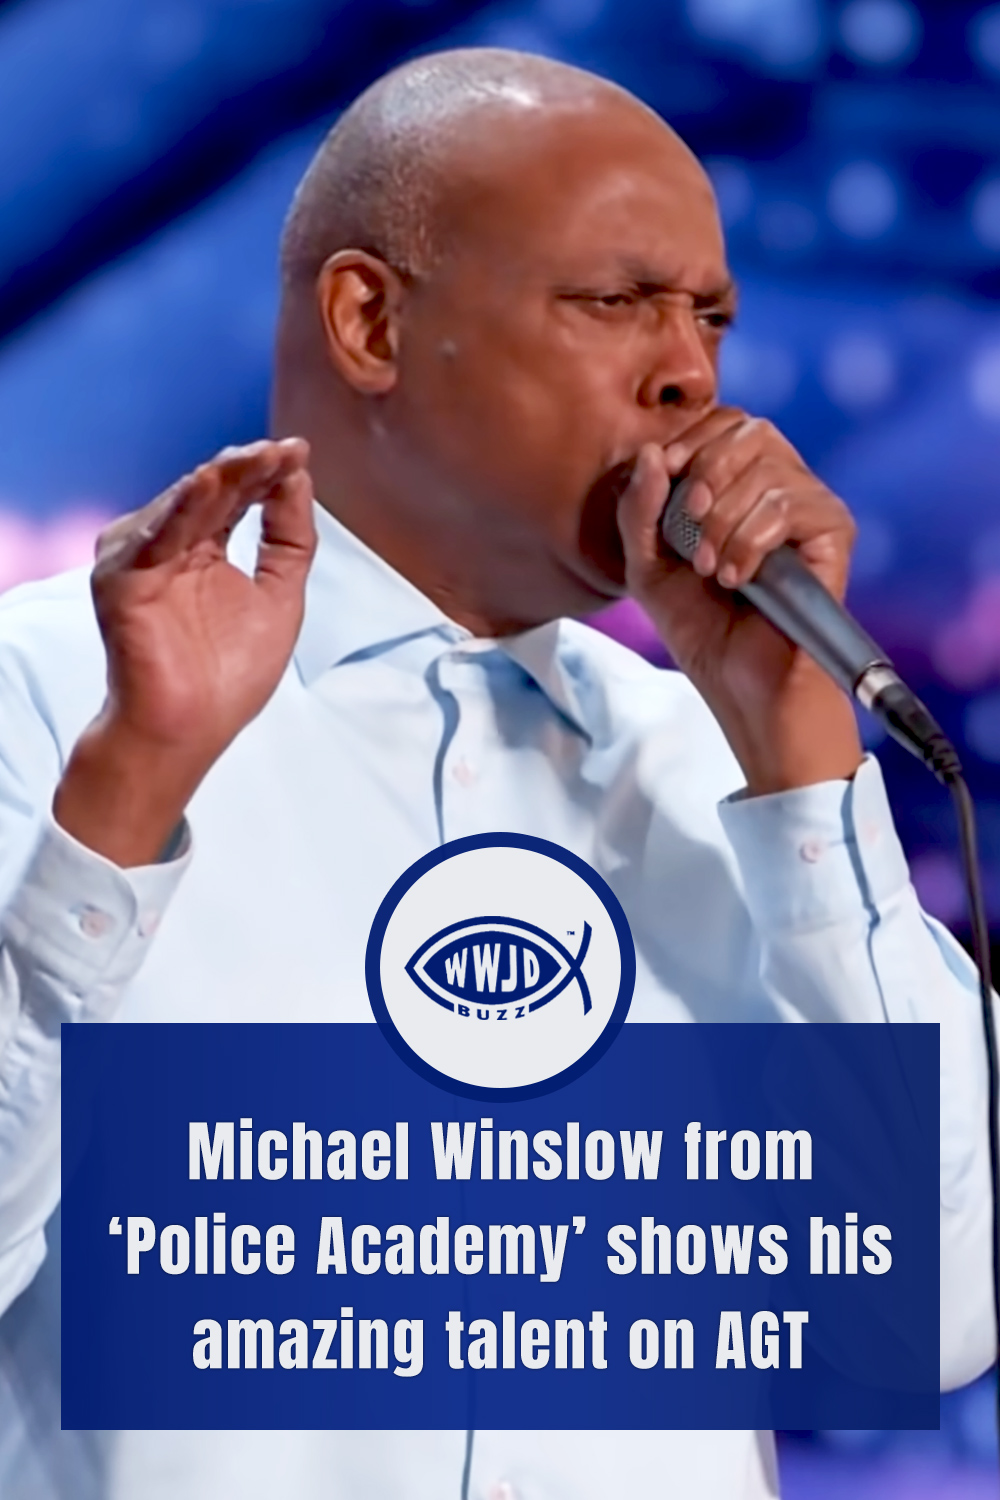 Michael Winslow from ‘Police Academy’ shows his amazing talent on AGT